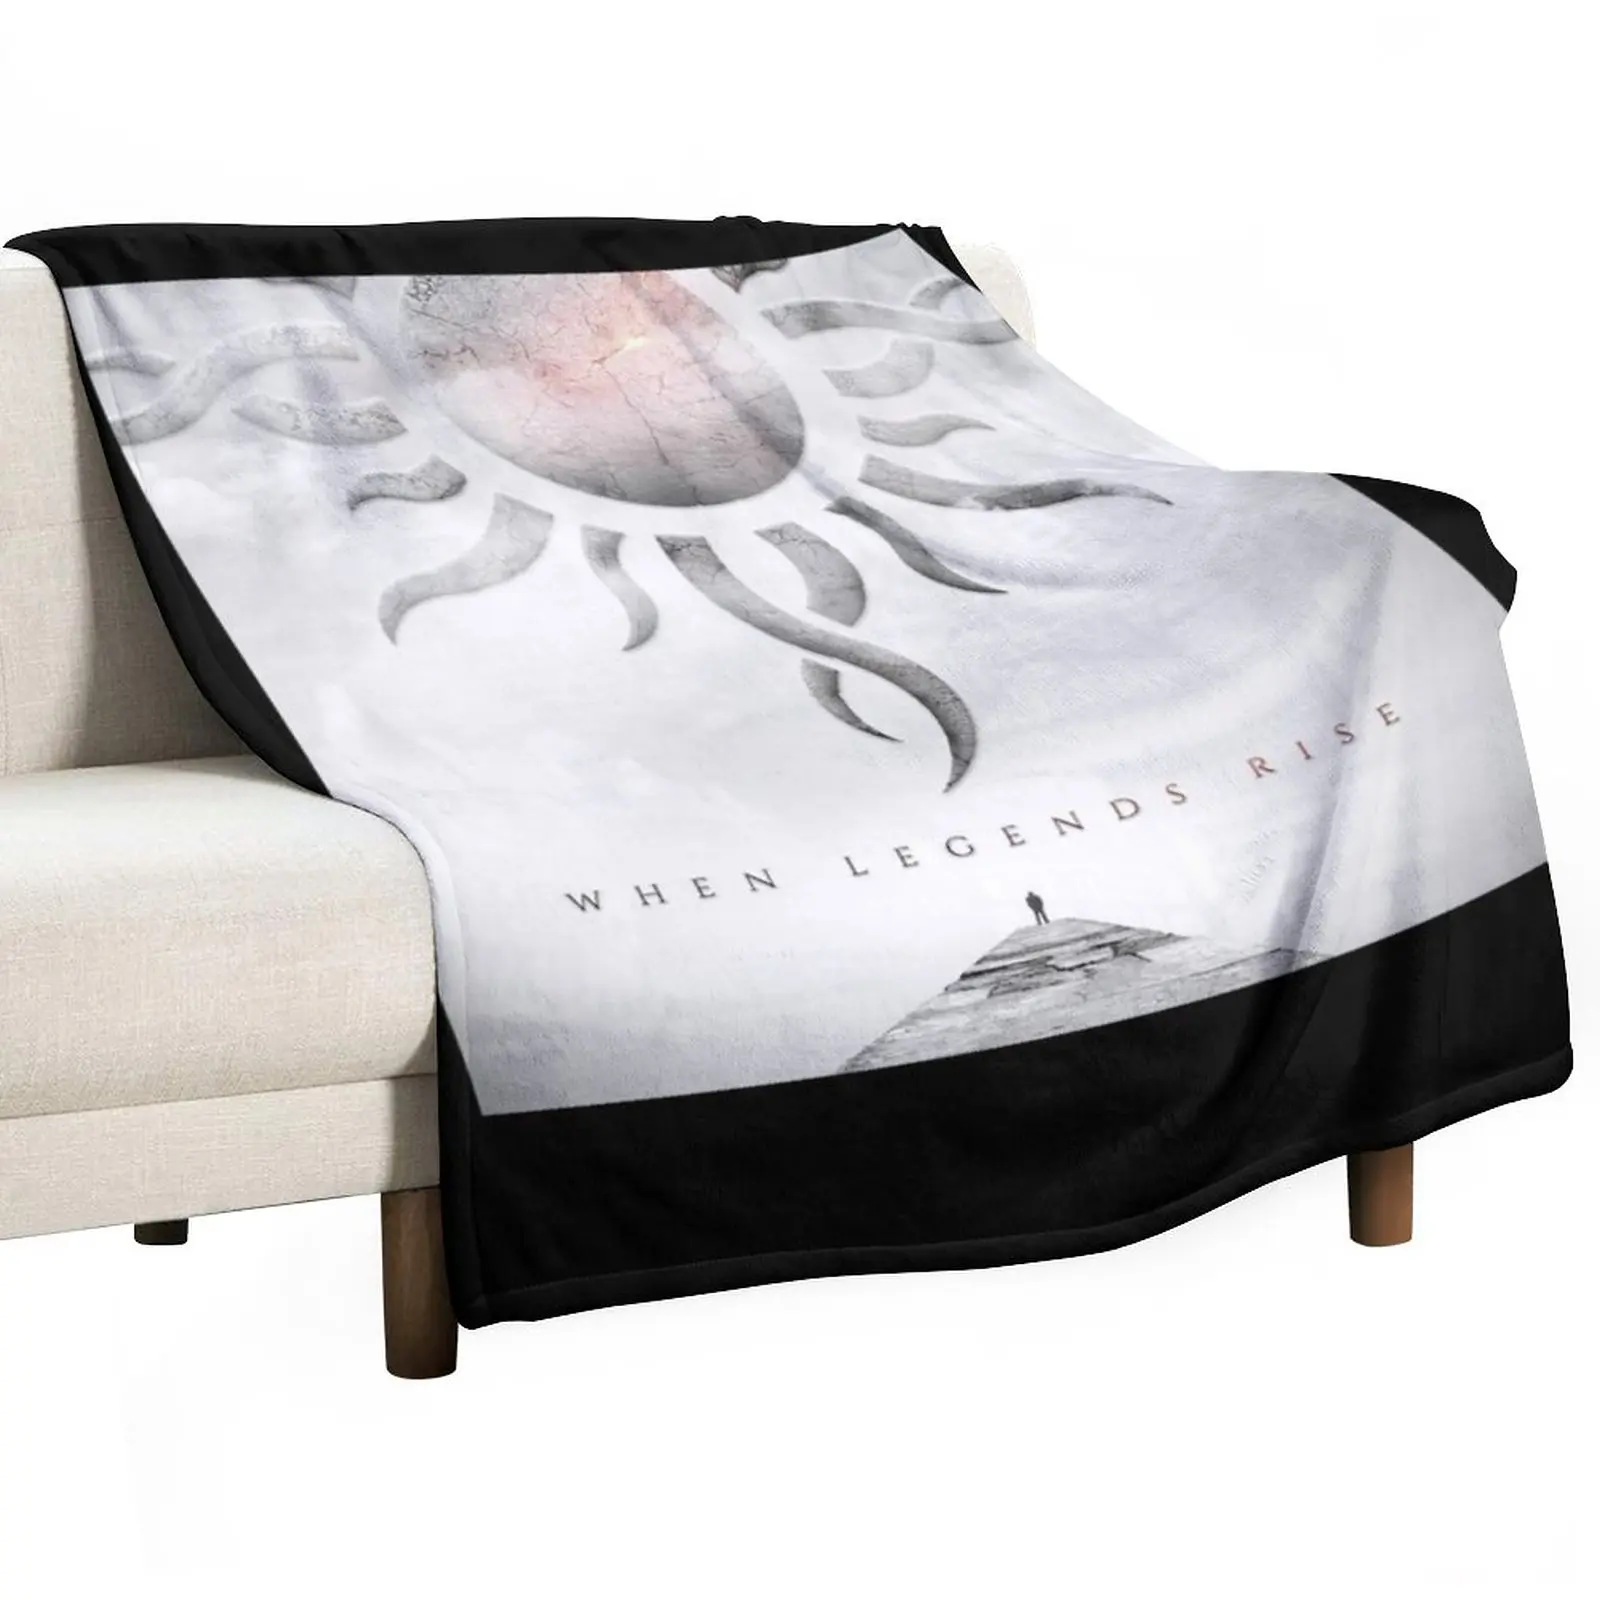 

New When Legends Rise Throw Blanket wednesday Fluffy Soft Blankets